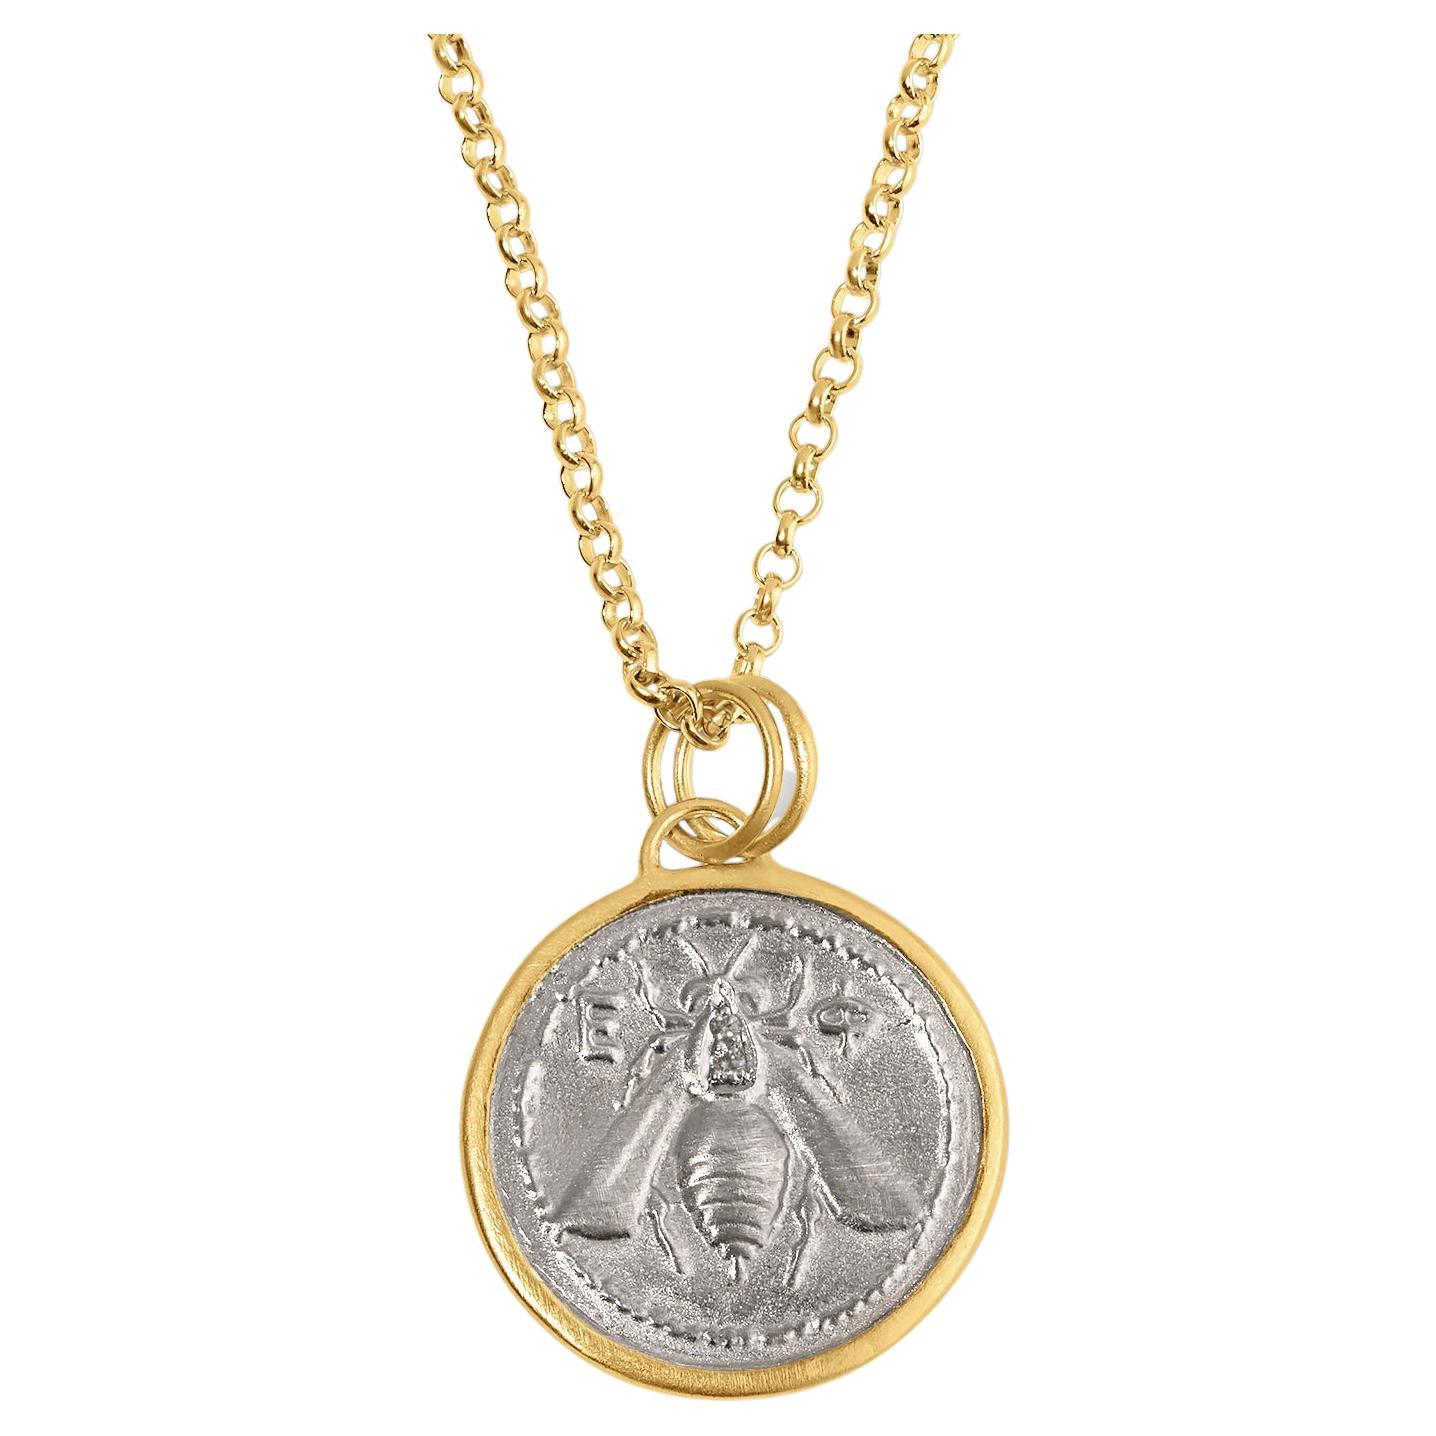 Double Sided Bee Coin with Stag & Diamond Detail 24kt Gold & Silver by Kurtulan